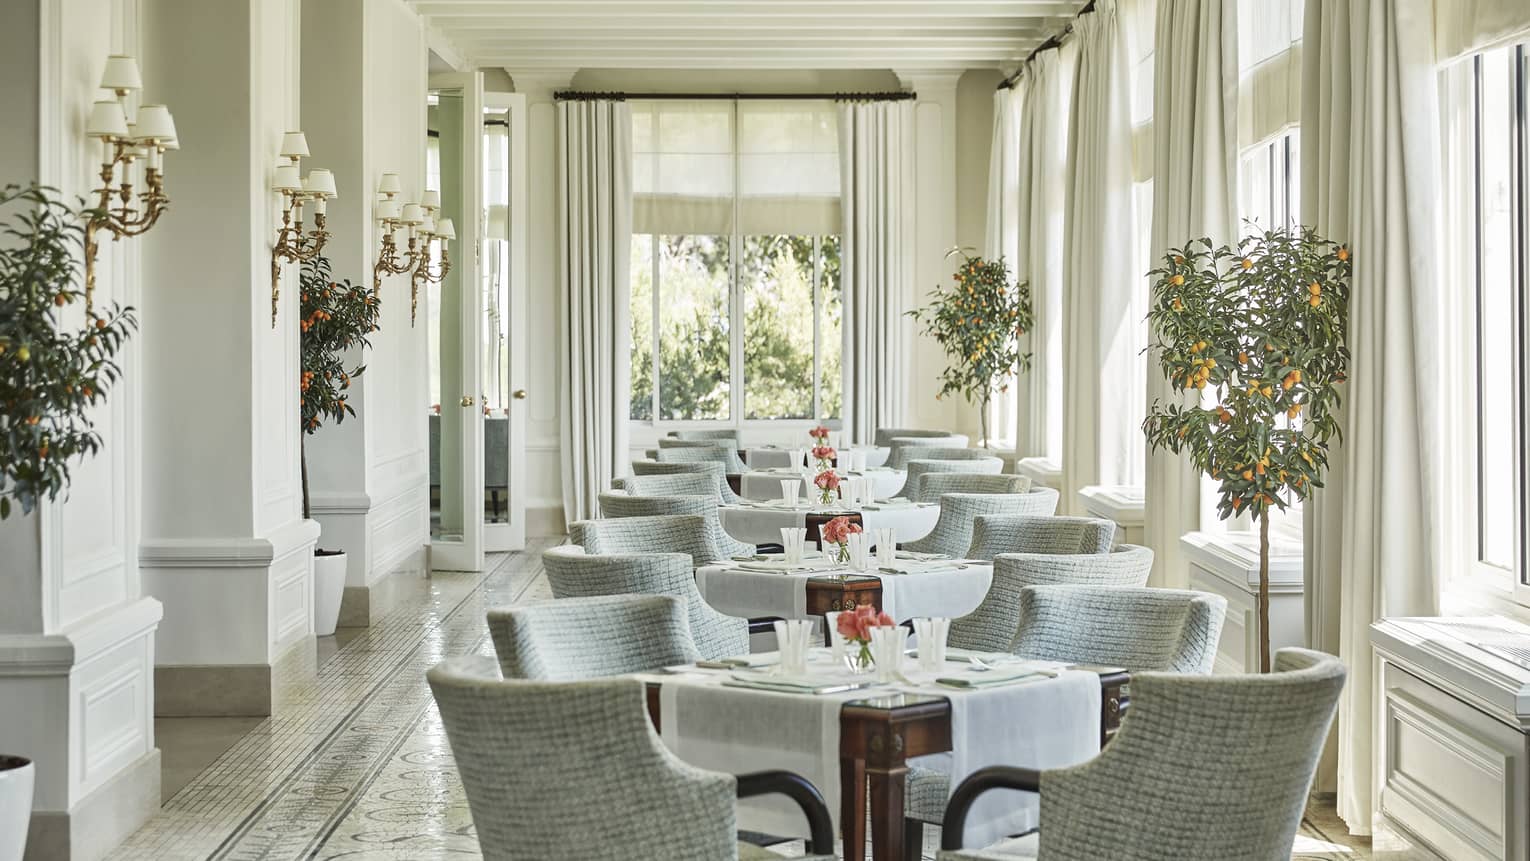 Grey chairs around tables in sunny Le Veranda dining room